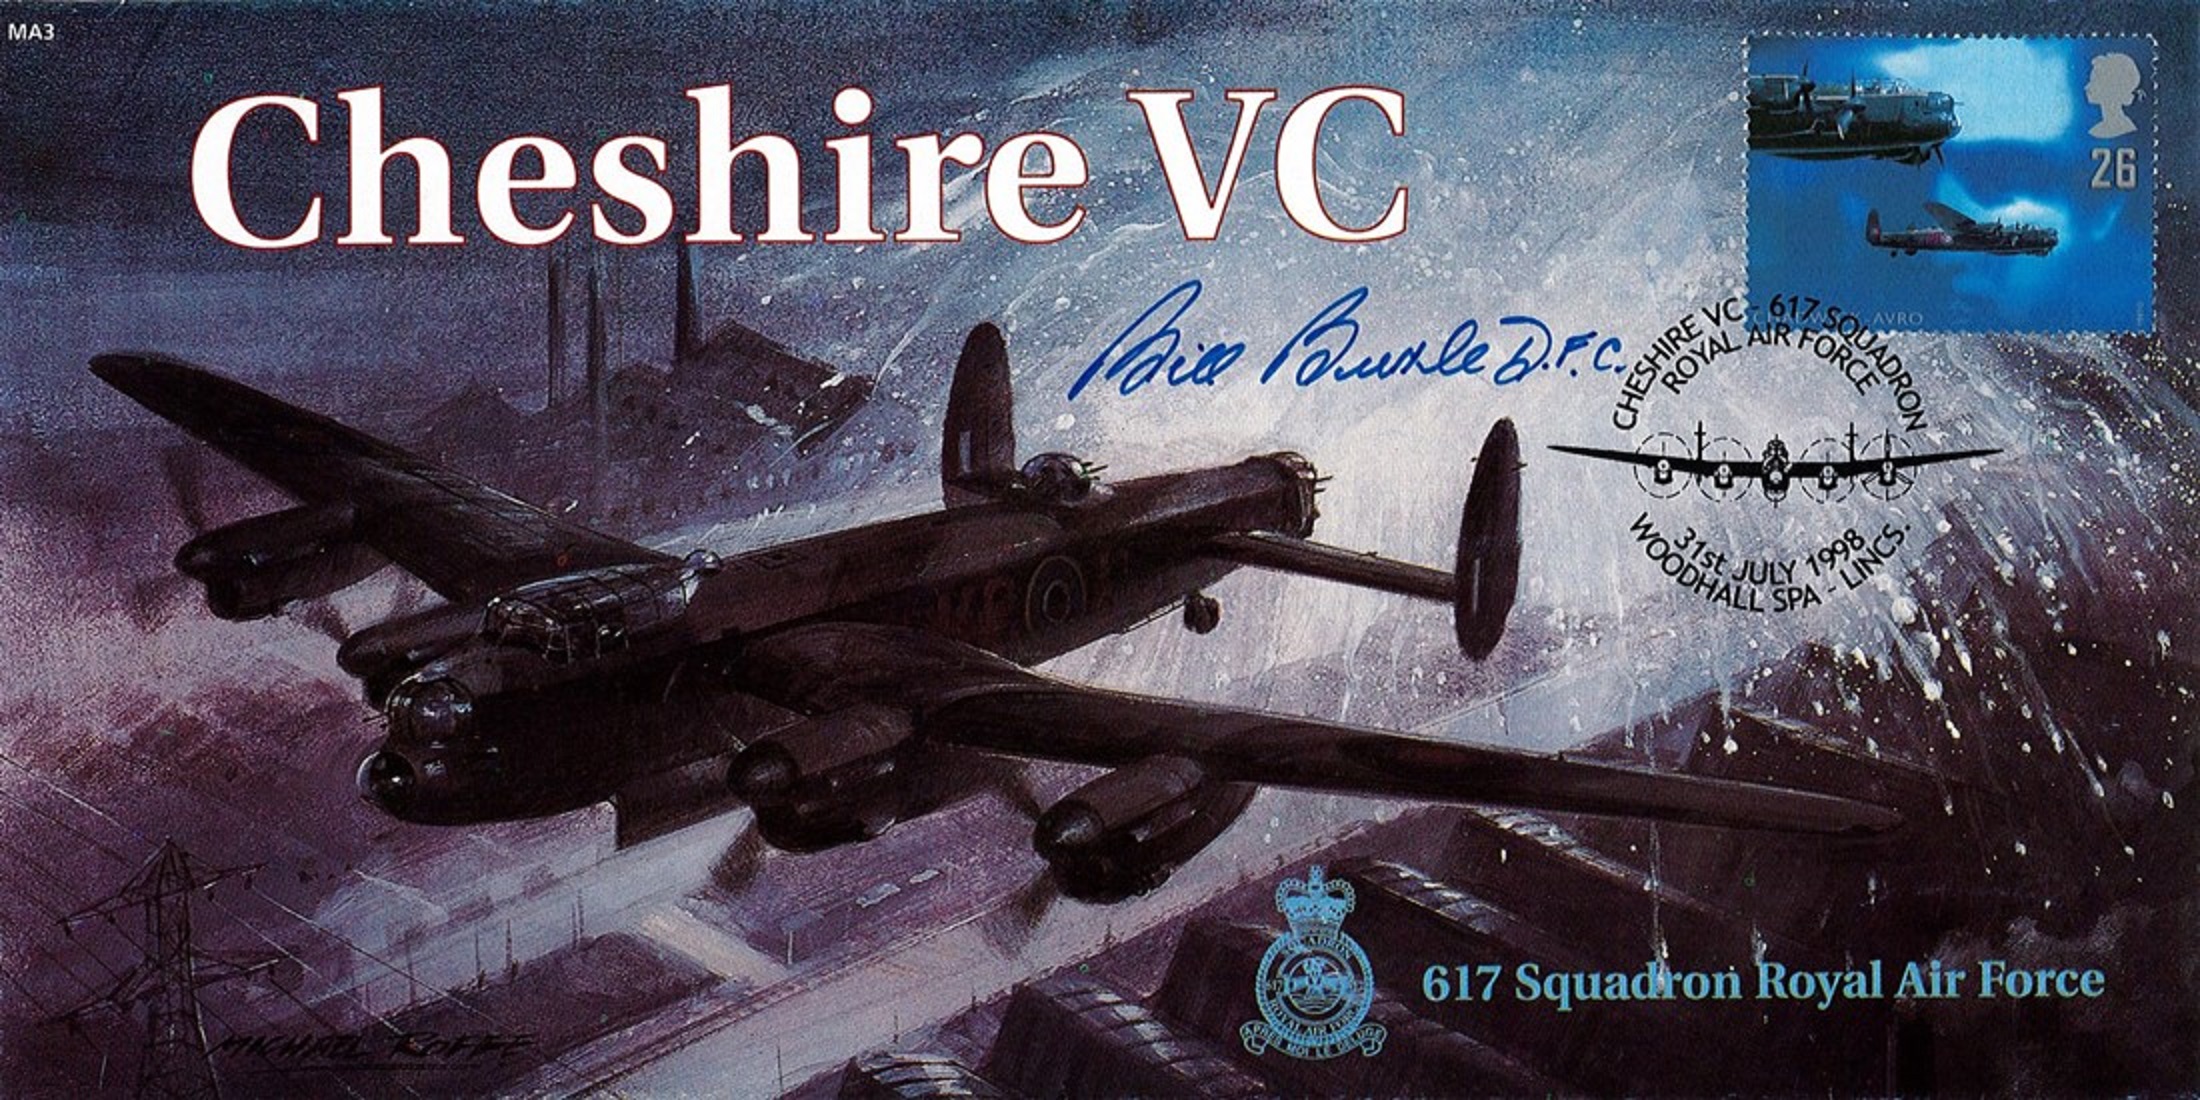 WW2 Flt Lt Bill Buttle DFC Signed Cheshire VC FDC. 10 of 18. British Stamp with 31st July 1998